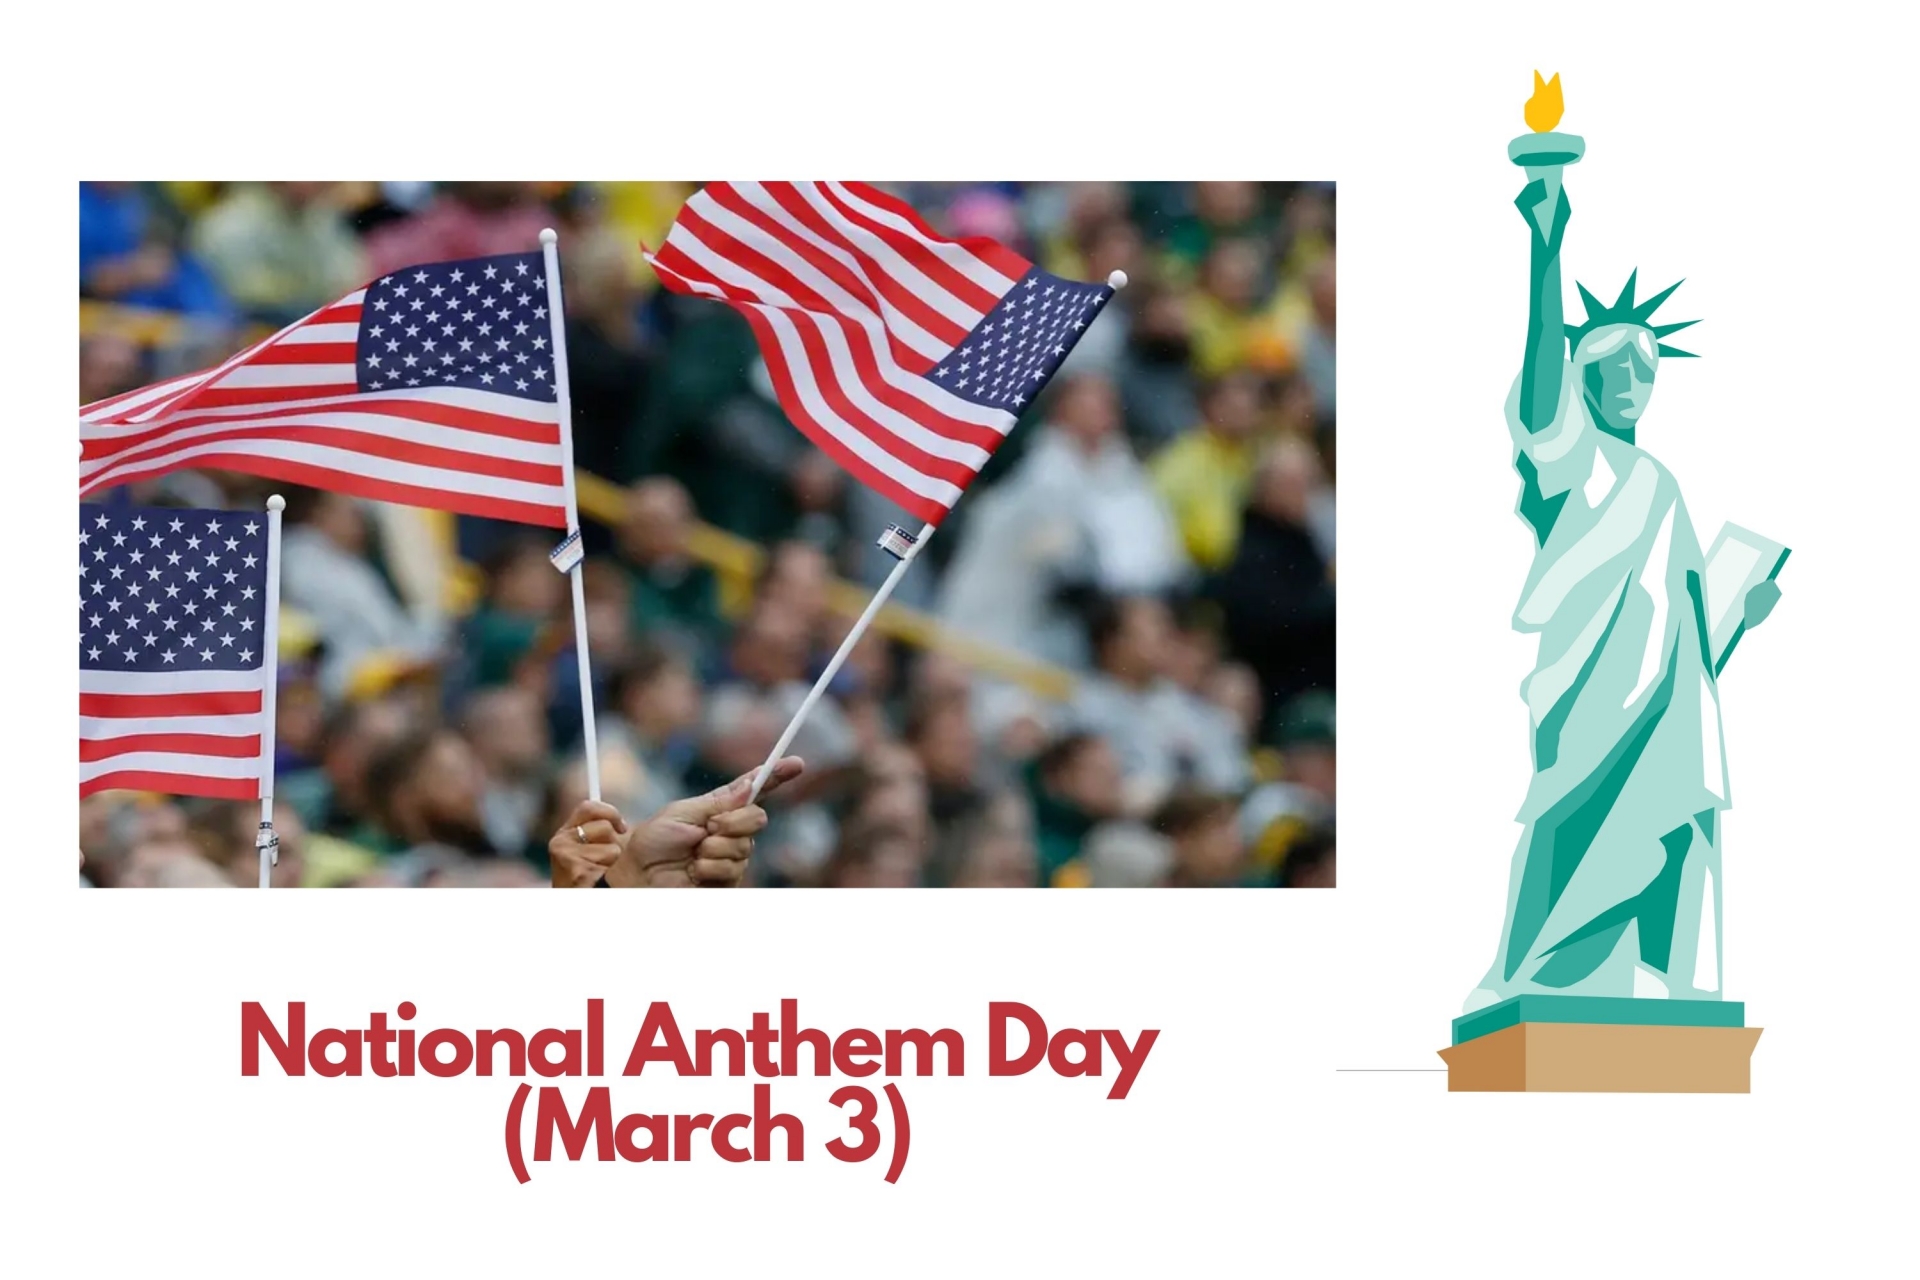 U.S National Anthem Day (March 3): History, Celebration and Facts